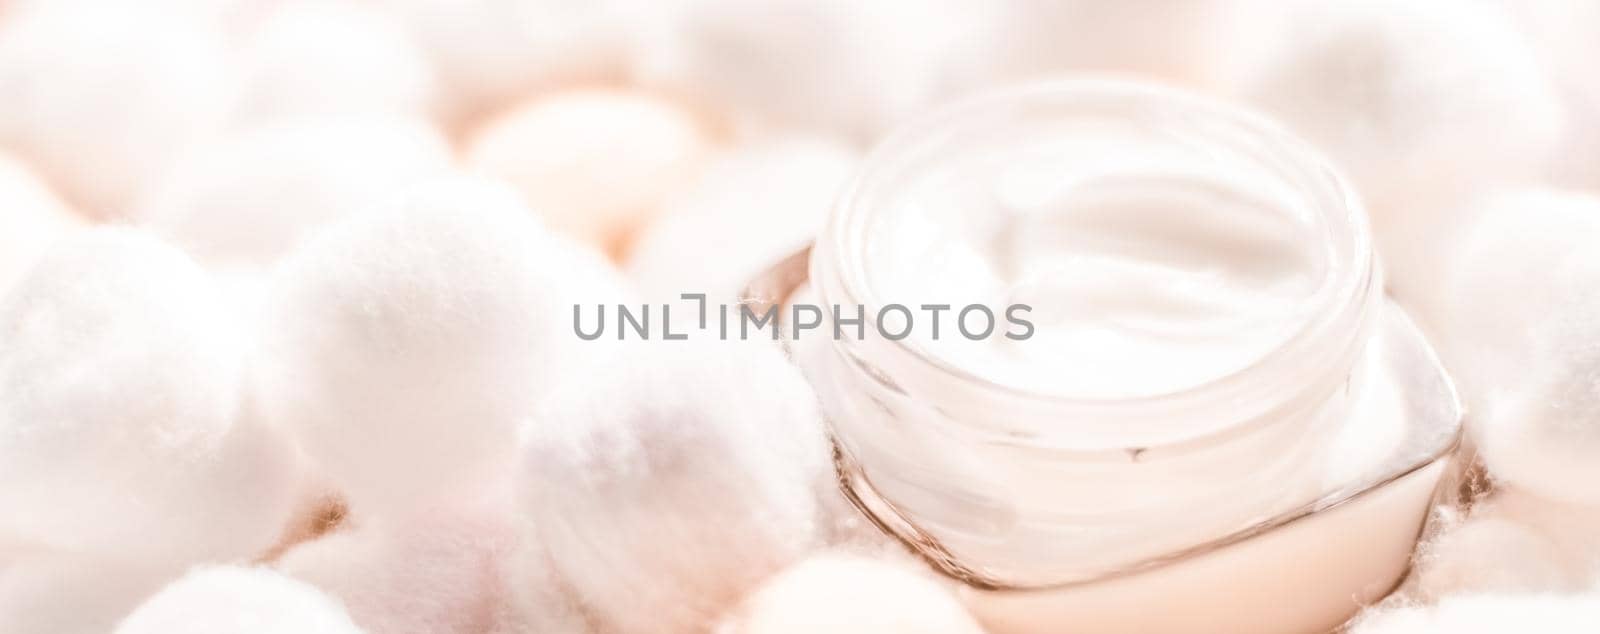 Luxury face cream for sensitive skin and orange cotton balls on background, spa cosmetics and natural skincare beauty brand product by Anneleven